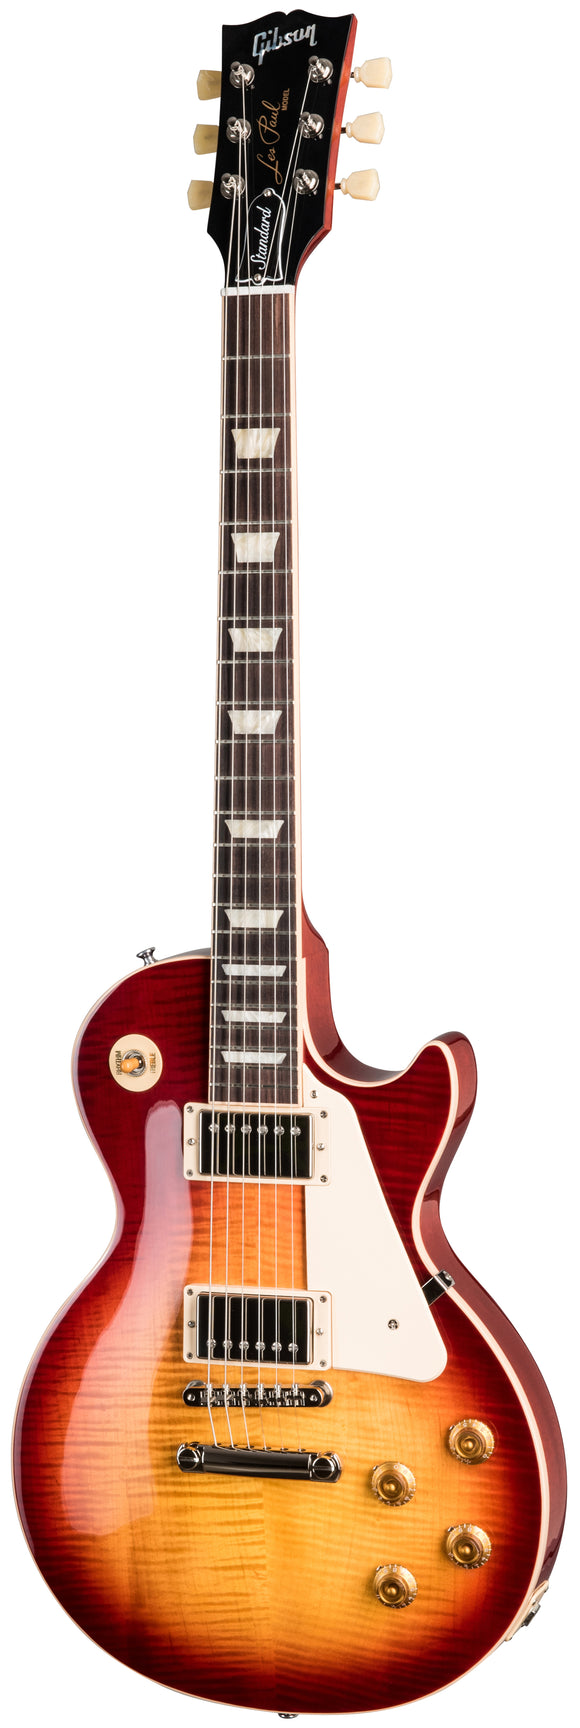 Gibson Les Paul Standard '50s Electric Guitar - Heritage Cherry 